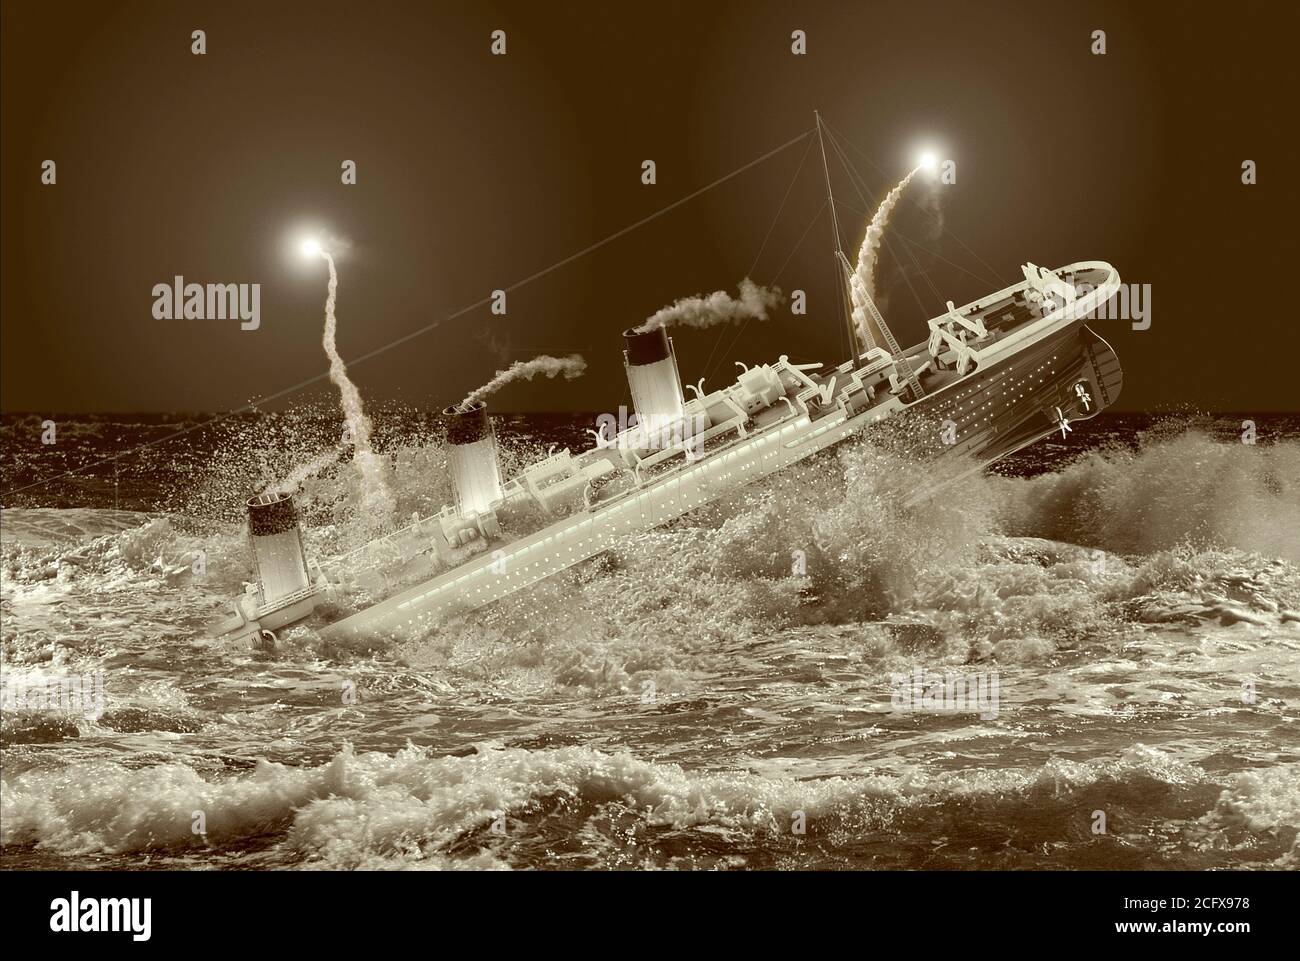 Sinking ship and rescue flares in stormy sea concept Stock Photo